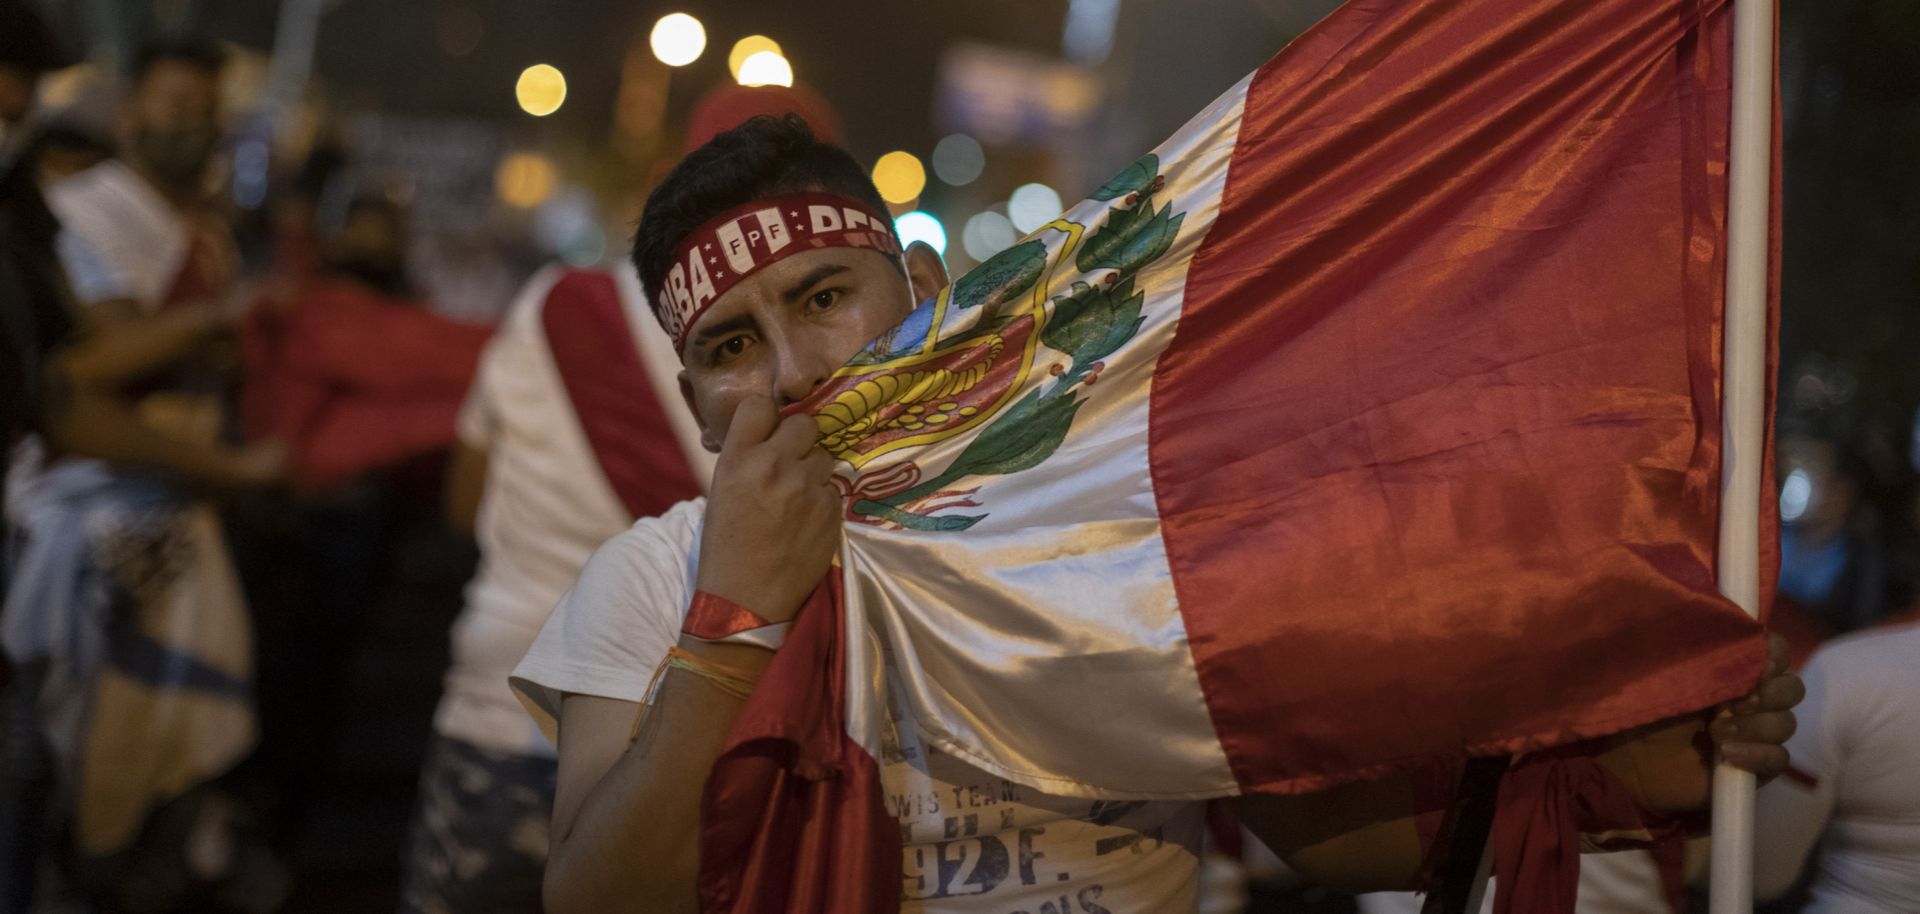 A supporter of ousted Peruvian President Martin Vizcarra embraces the country’s national flag during a protest in Lima, Peru, on Nov. 14, 2020.